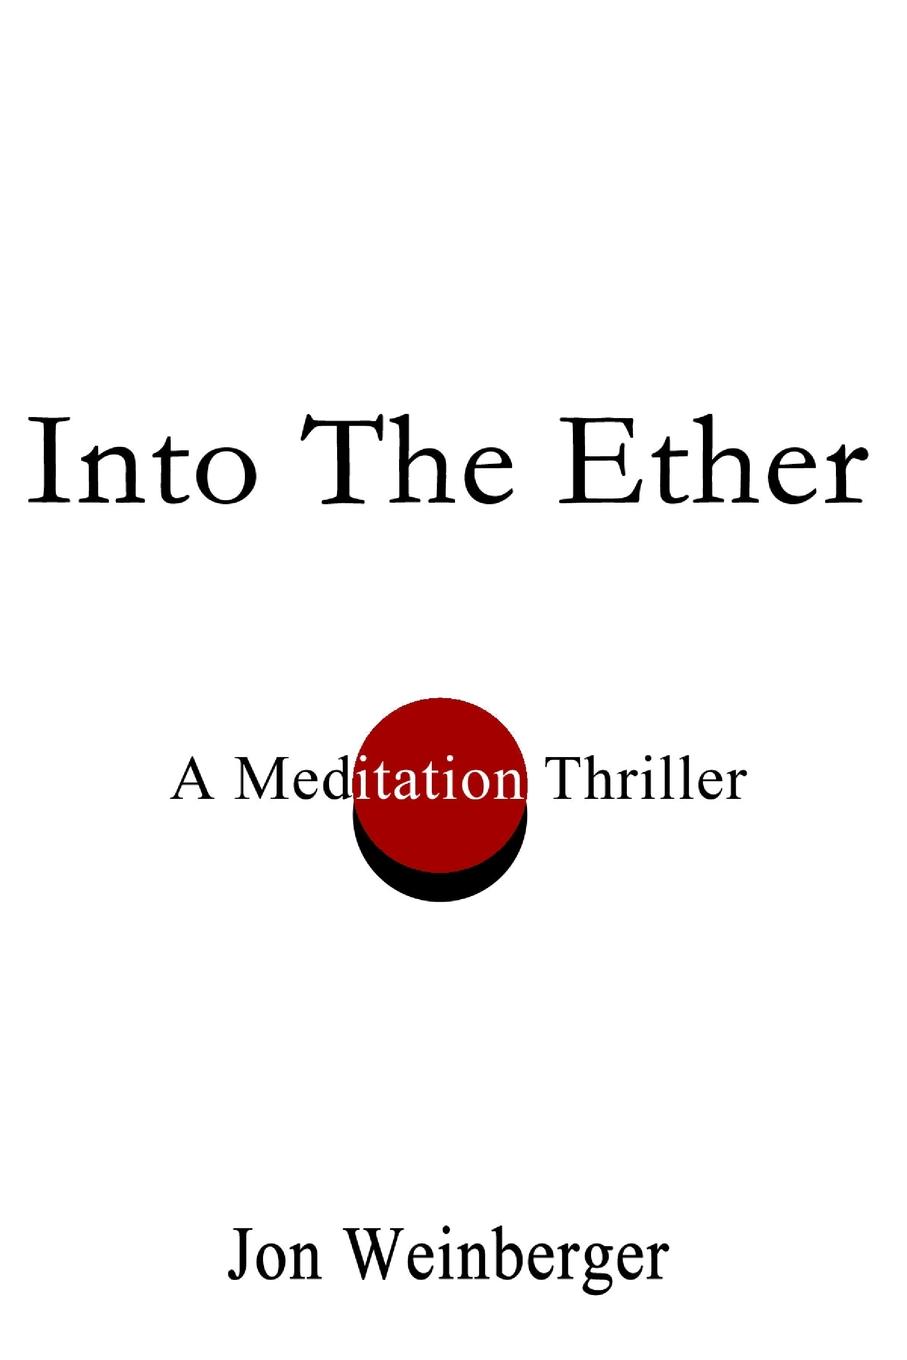 Into the Ether. A Meditation Thriller